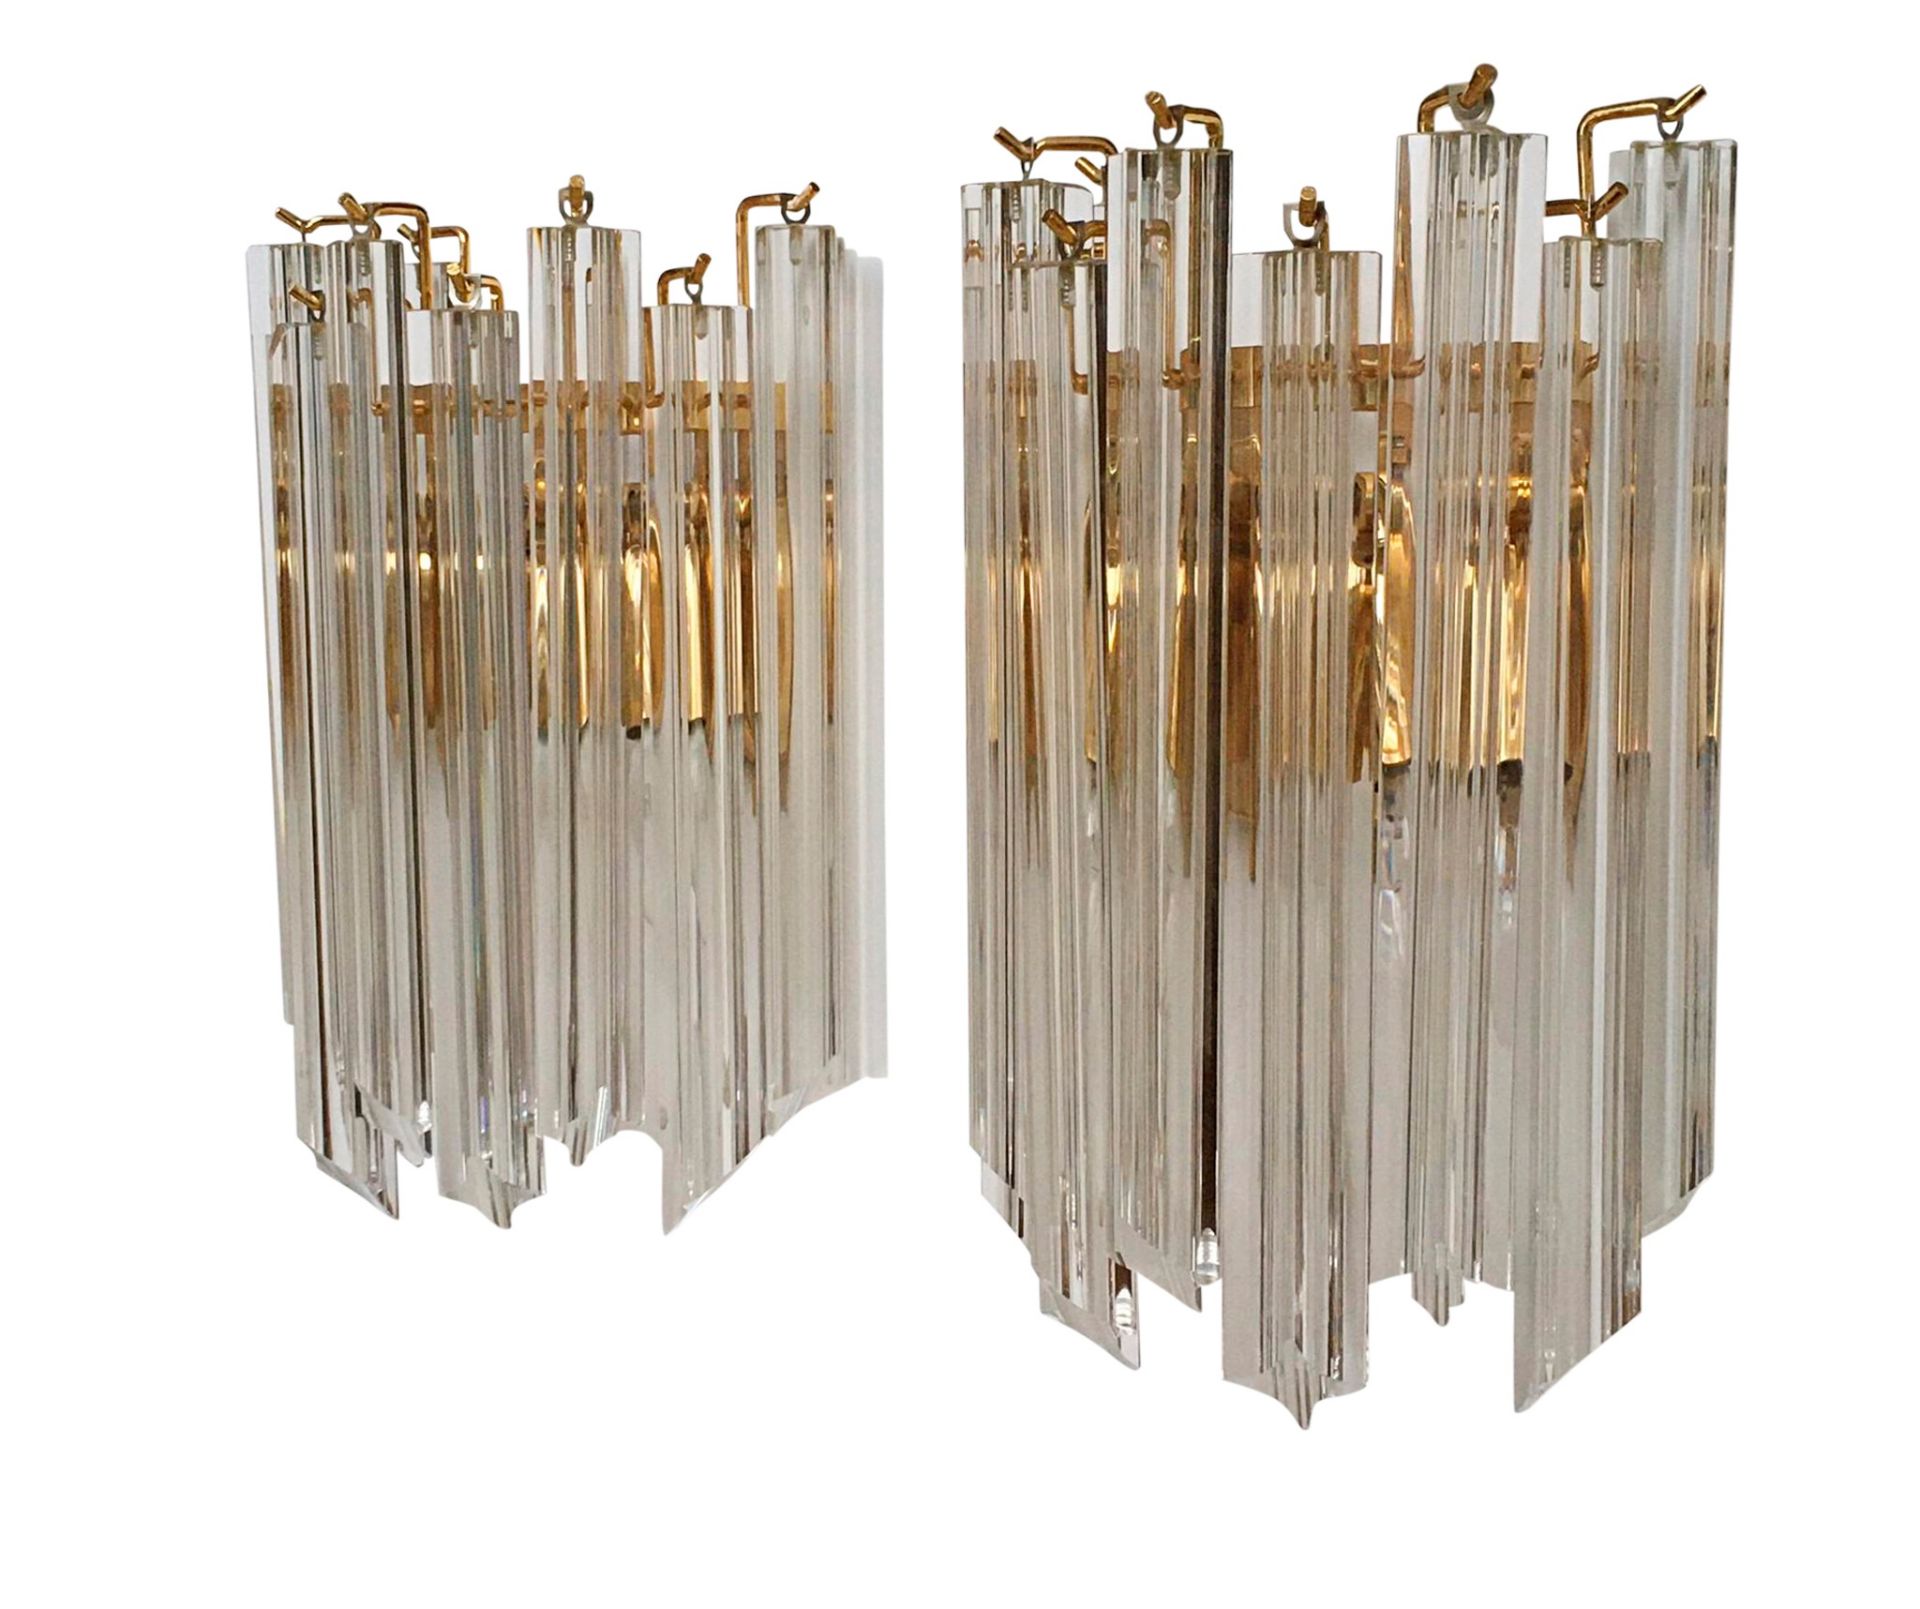 ATTRIBUTED TO VENINI, MURANO PAIR OF 'ASTRA QUADRILOBO' CRYSTAL CHANDELIERS, CIRCA 1960 - Image 3 of 4